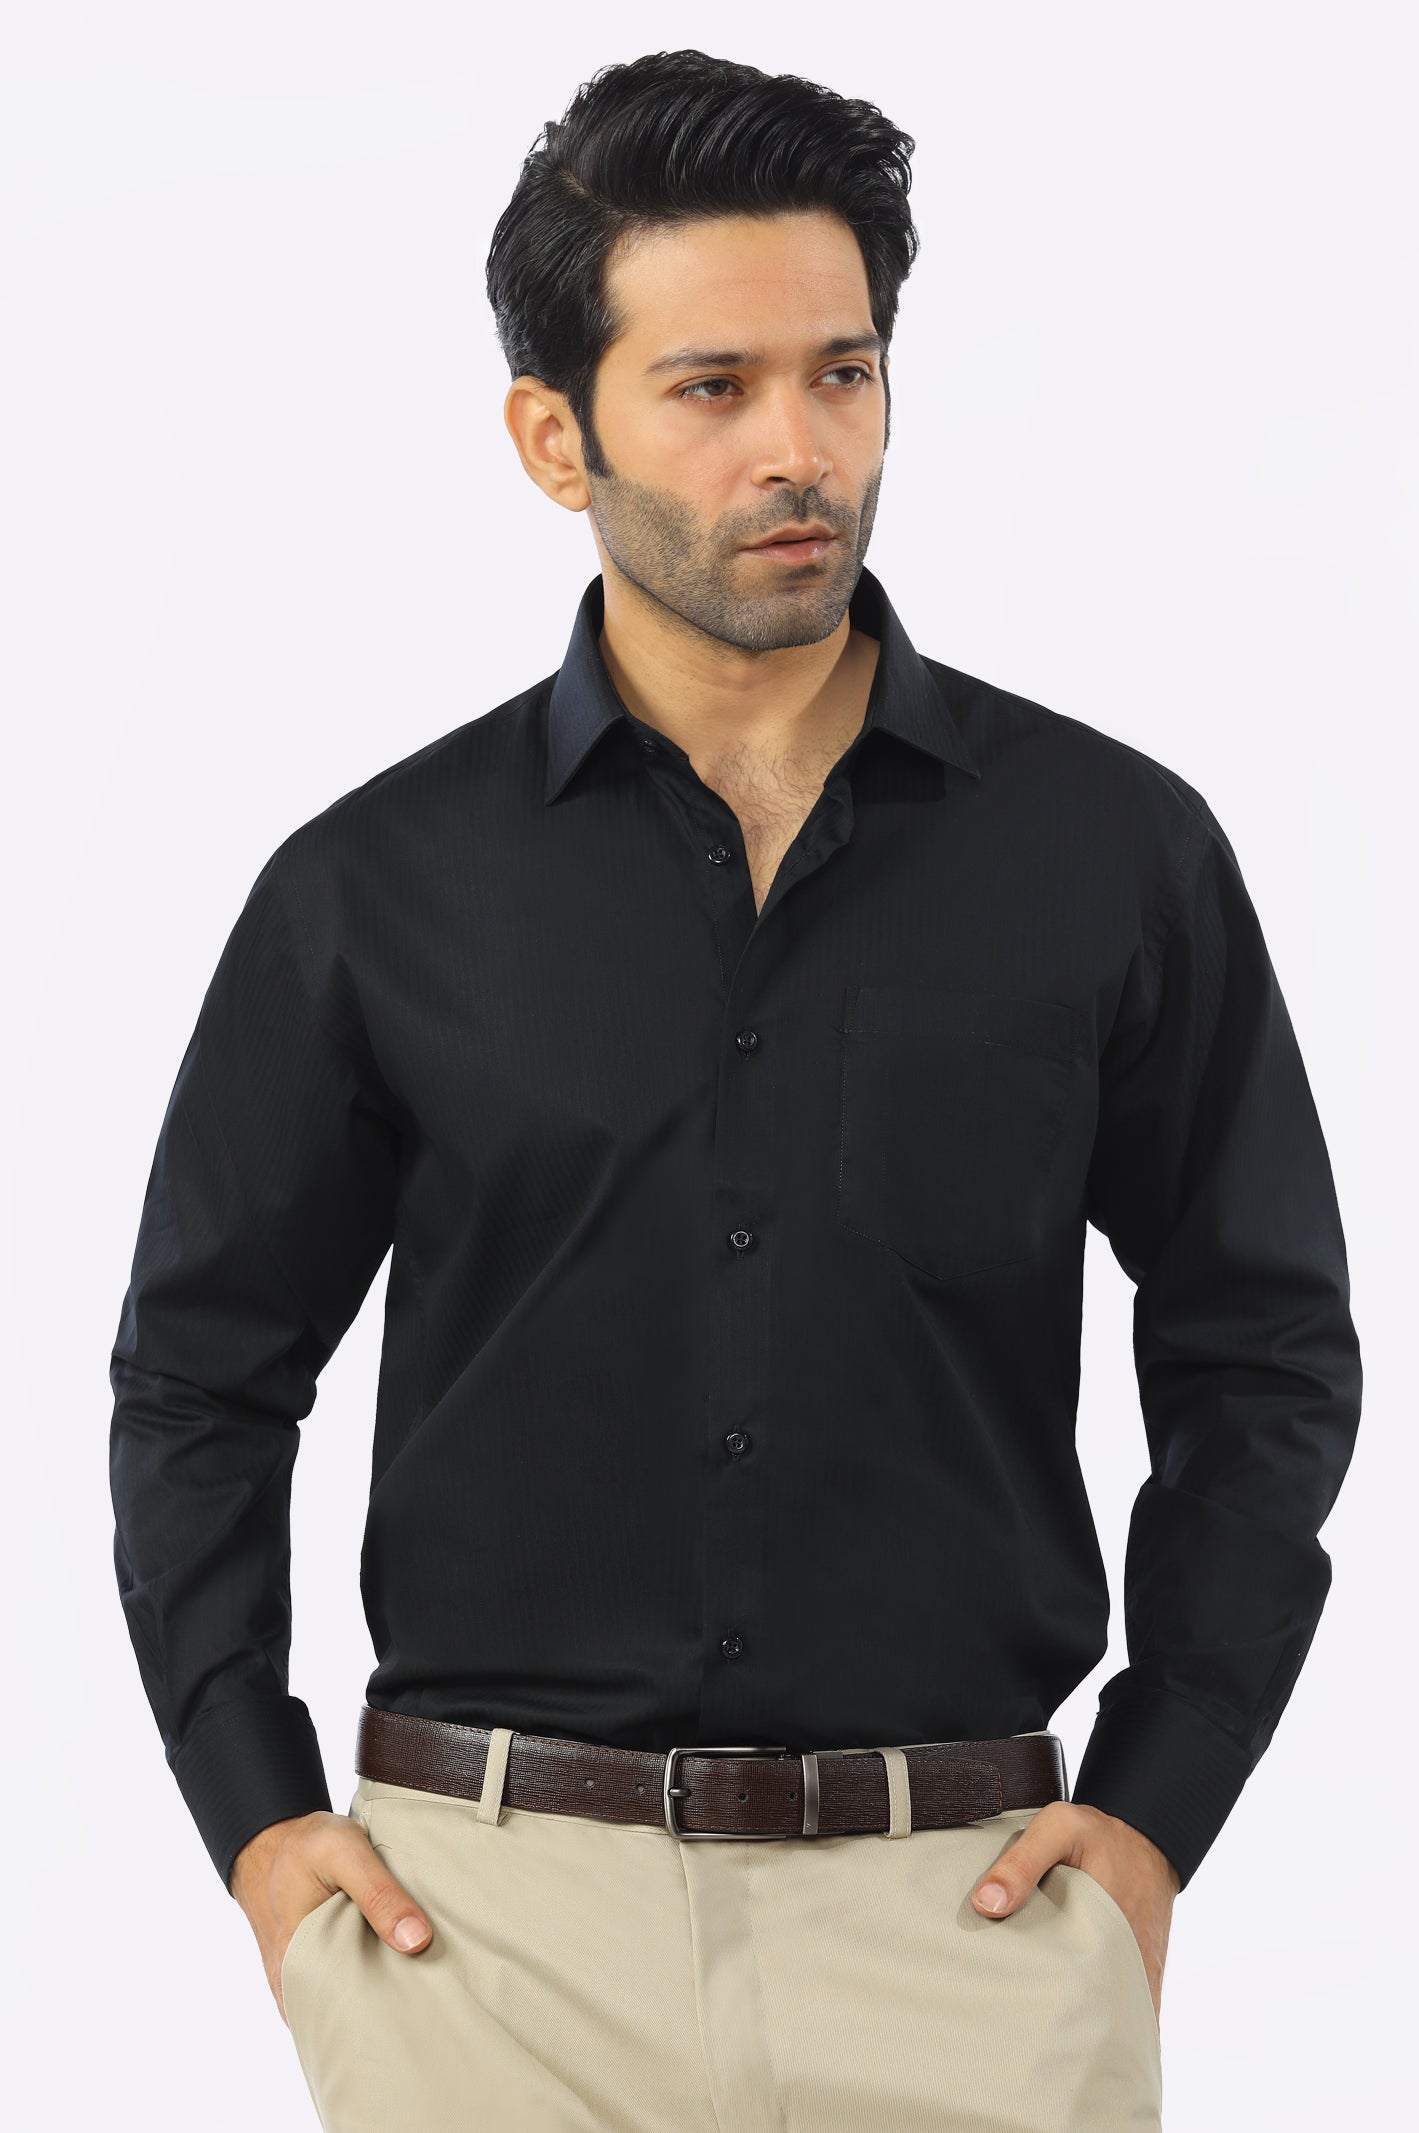 Black Textured Formal Shirt From Diners